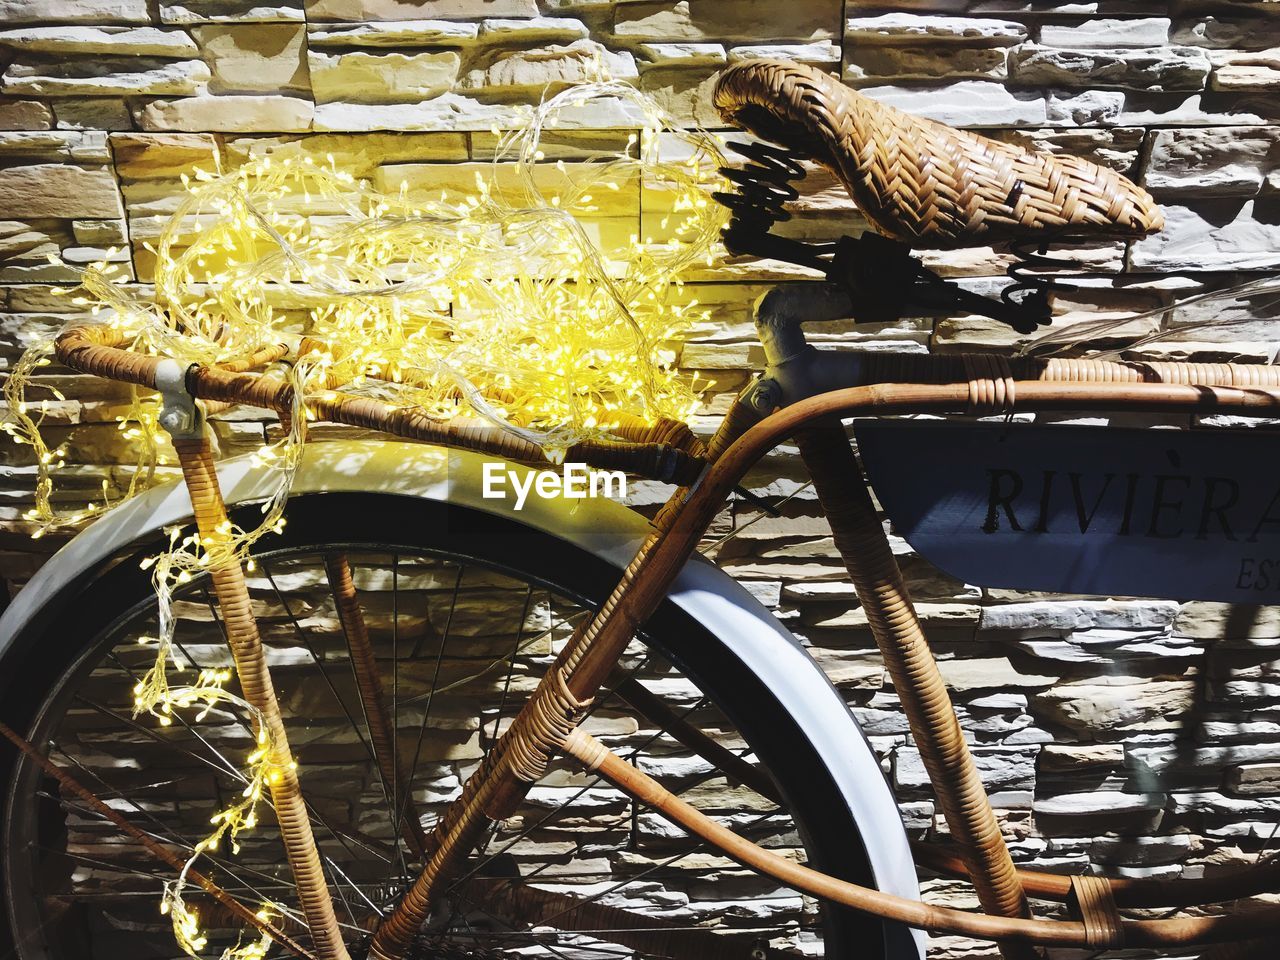 CLOSE-UP OF BIRD IN BASKET ON BICYCLE